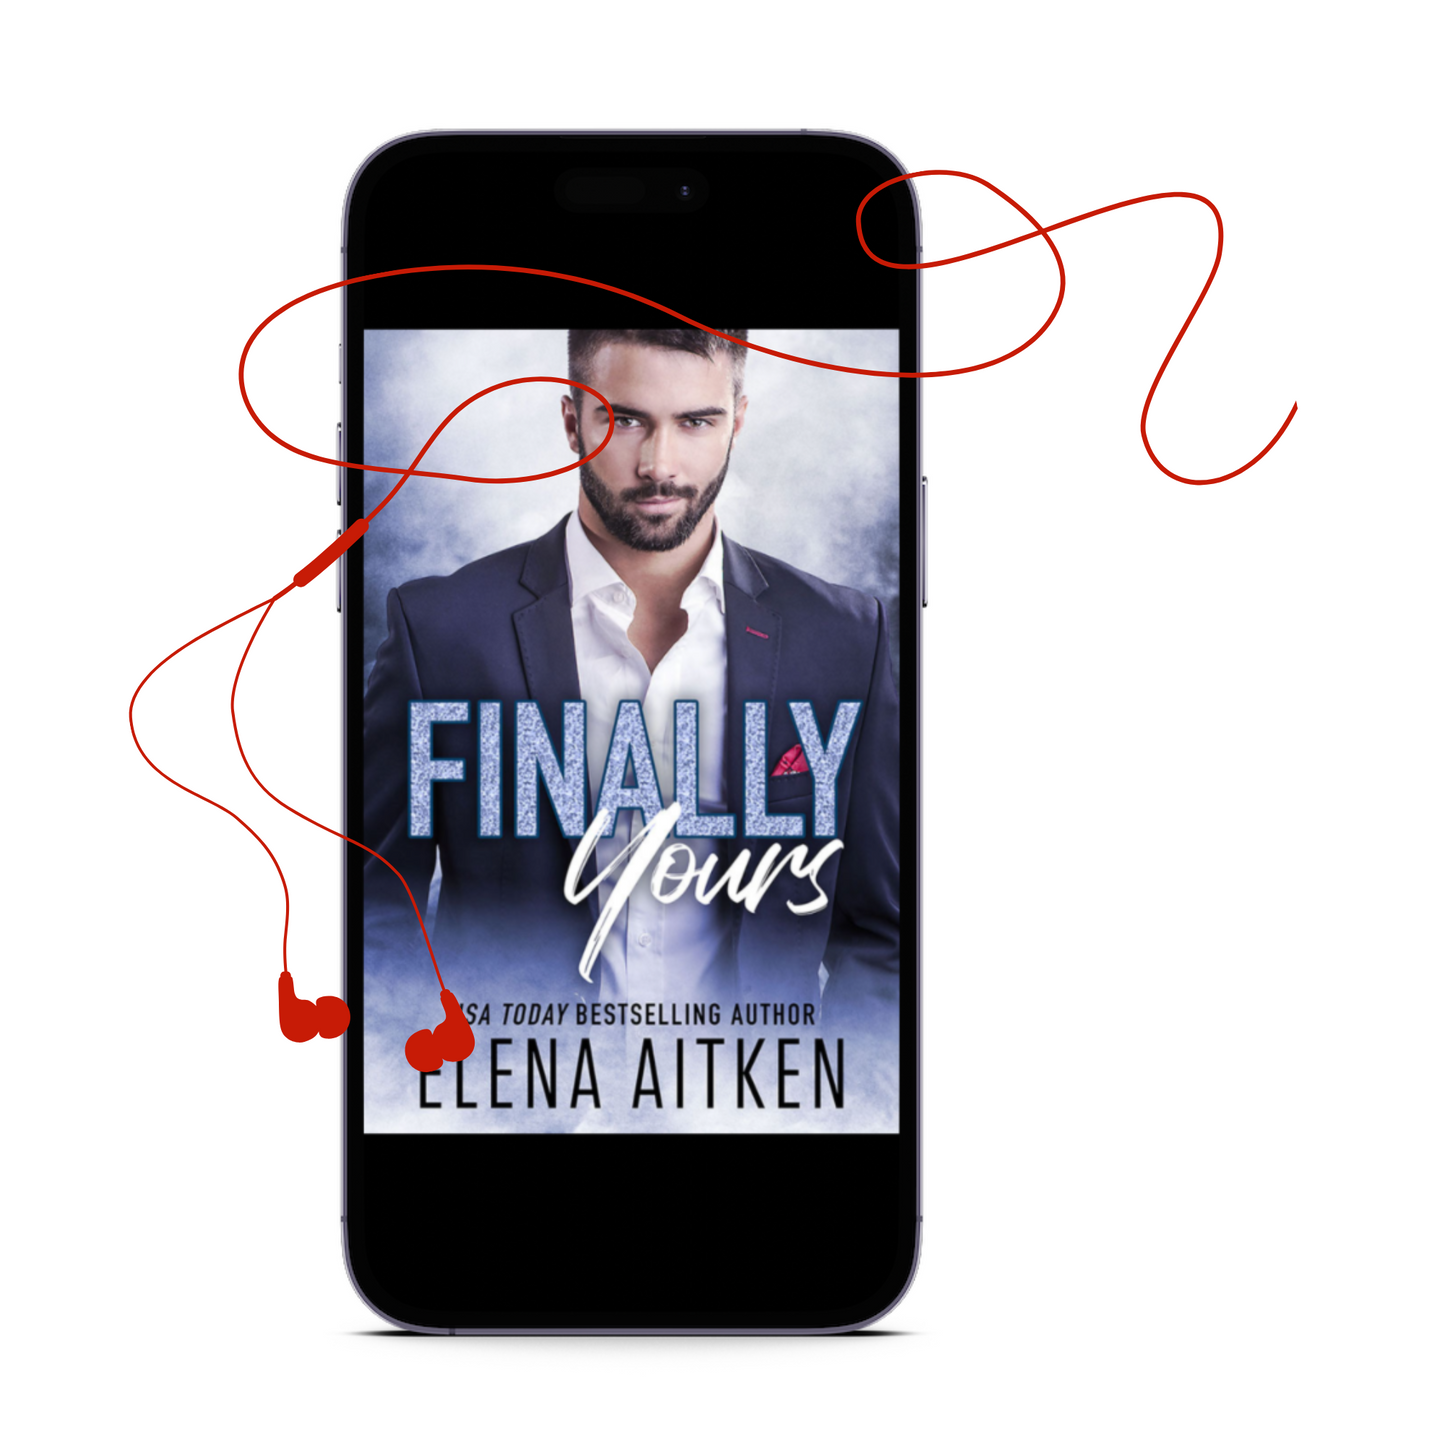 Finally Yours Audio